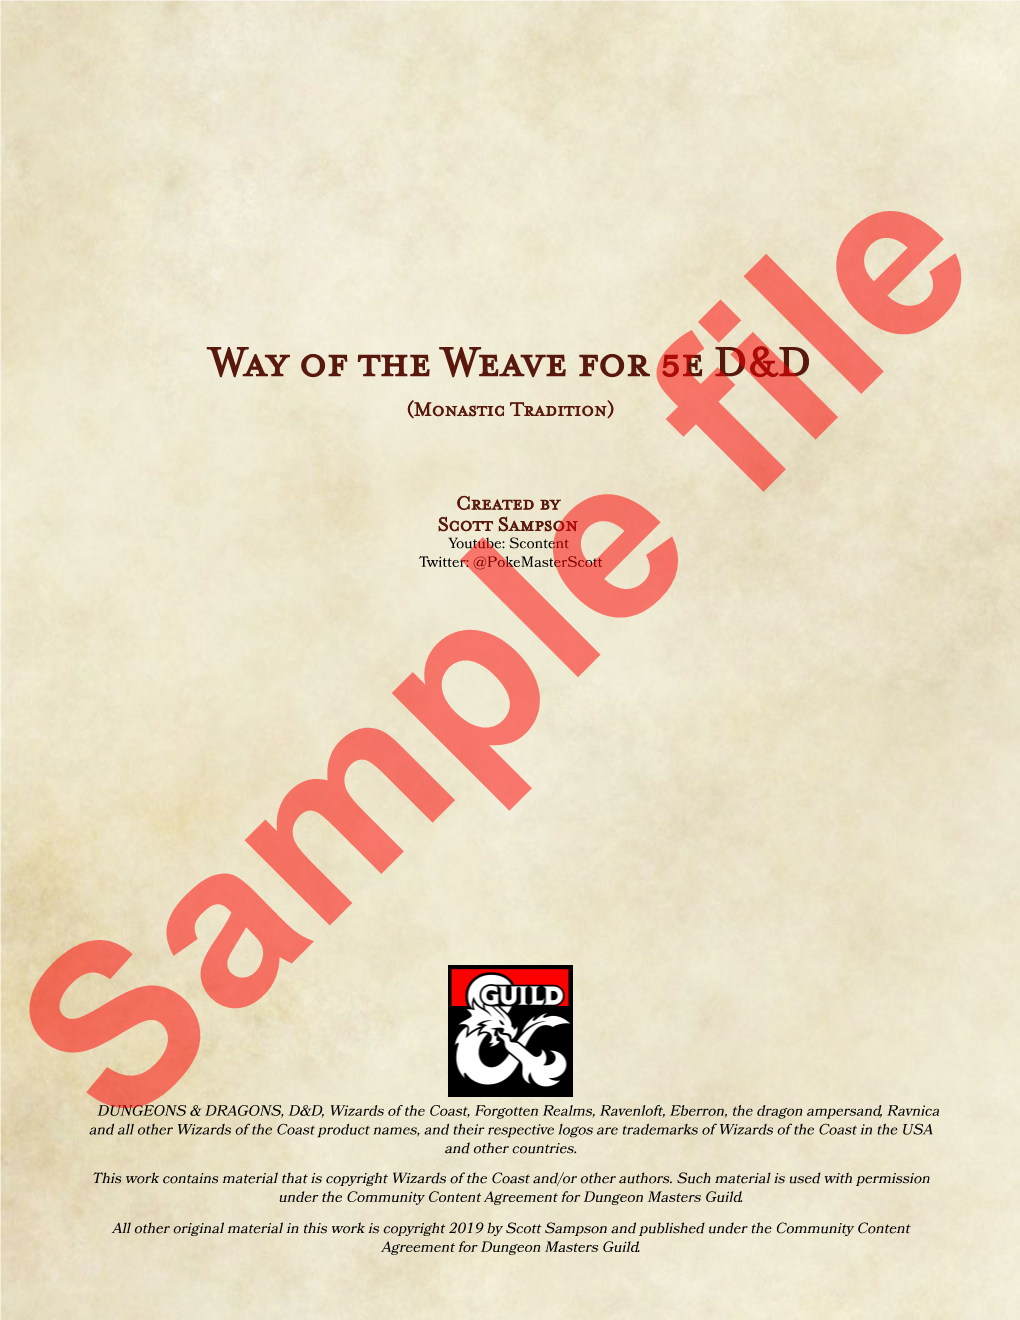 Way of the Weave for 5E D&D